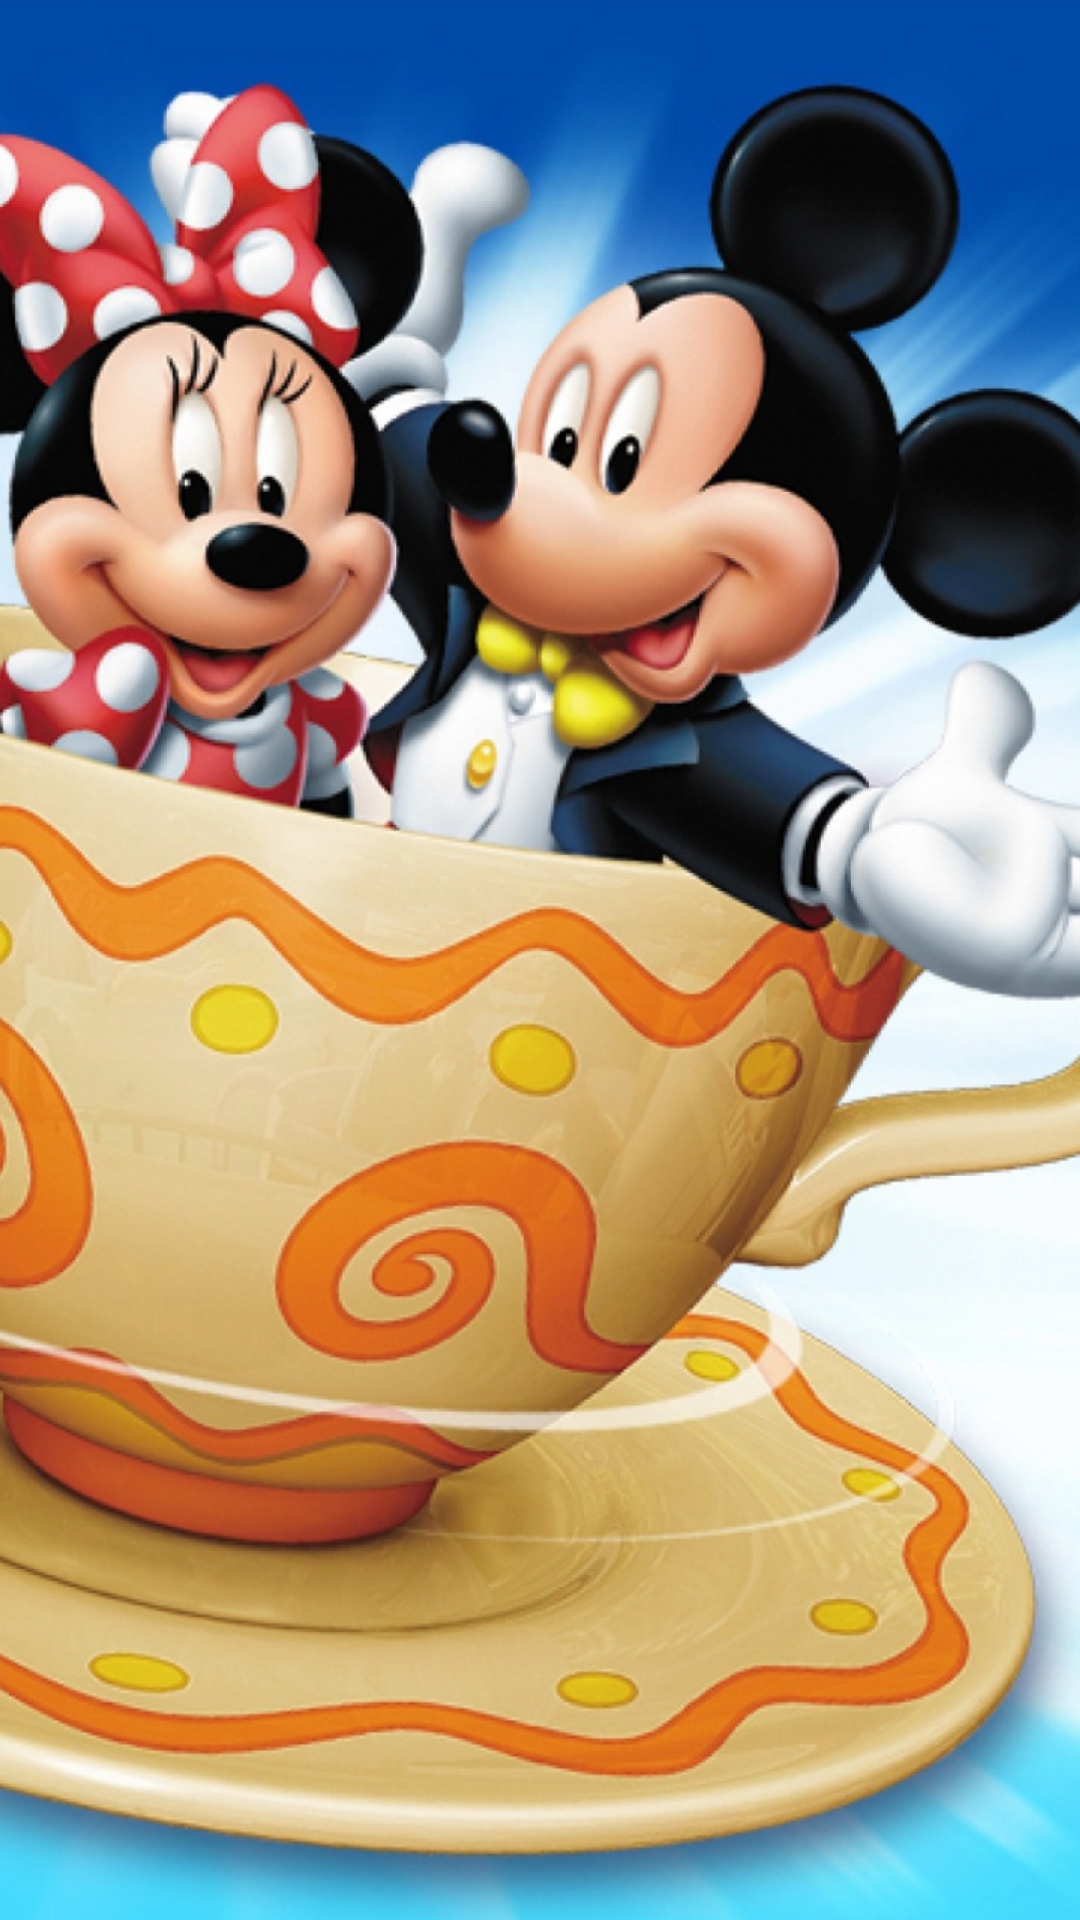 Mickey And Minnie Mouse In Cup wallpaper 1080x1920